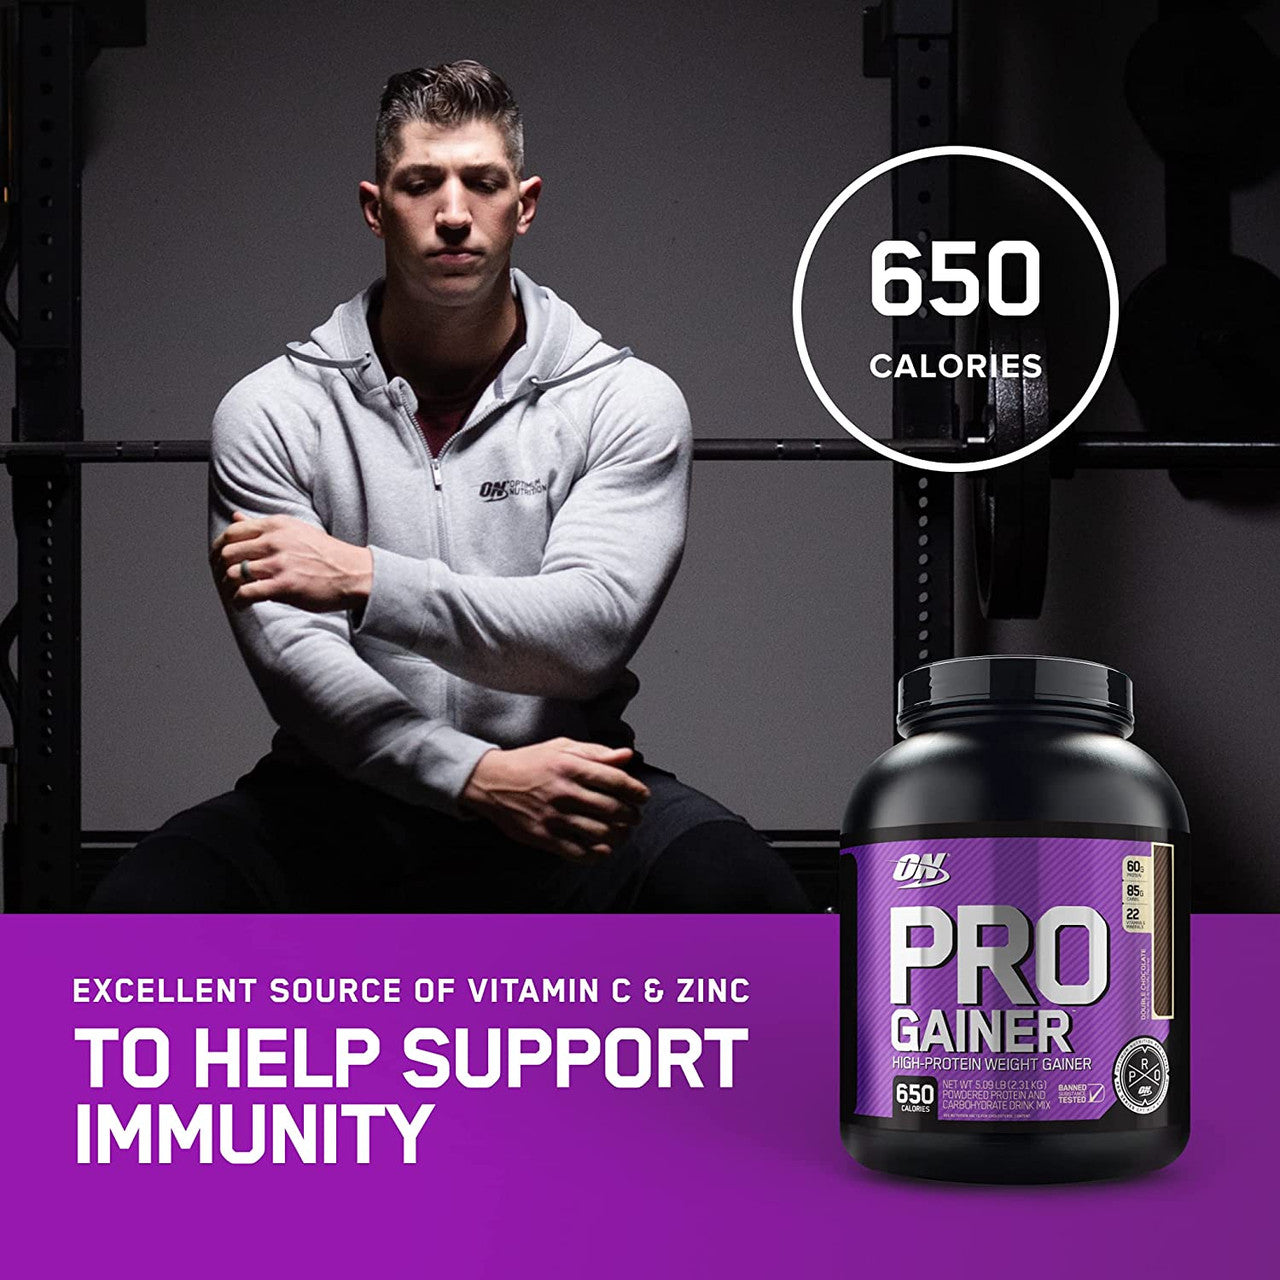 Optimum Nutrition Pro Gainer Product Highlights To Help Support Immunity